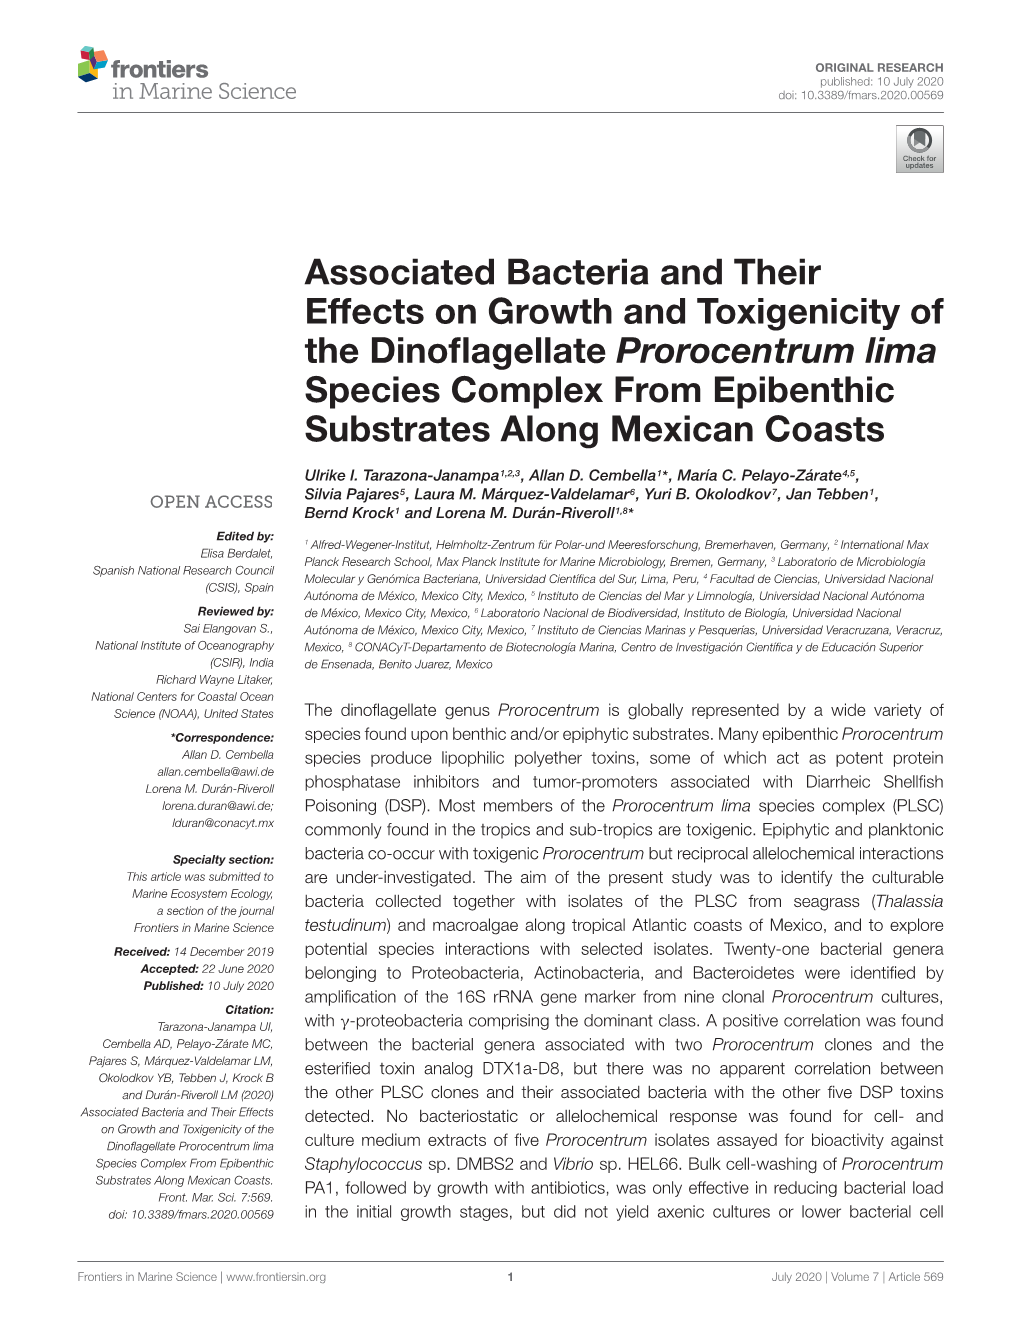 Associated Bacteria and Their Effects on Growth and Toxigenicity of The